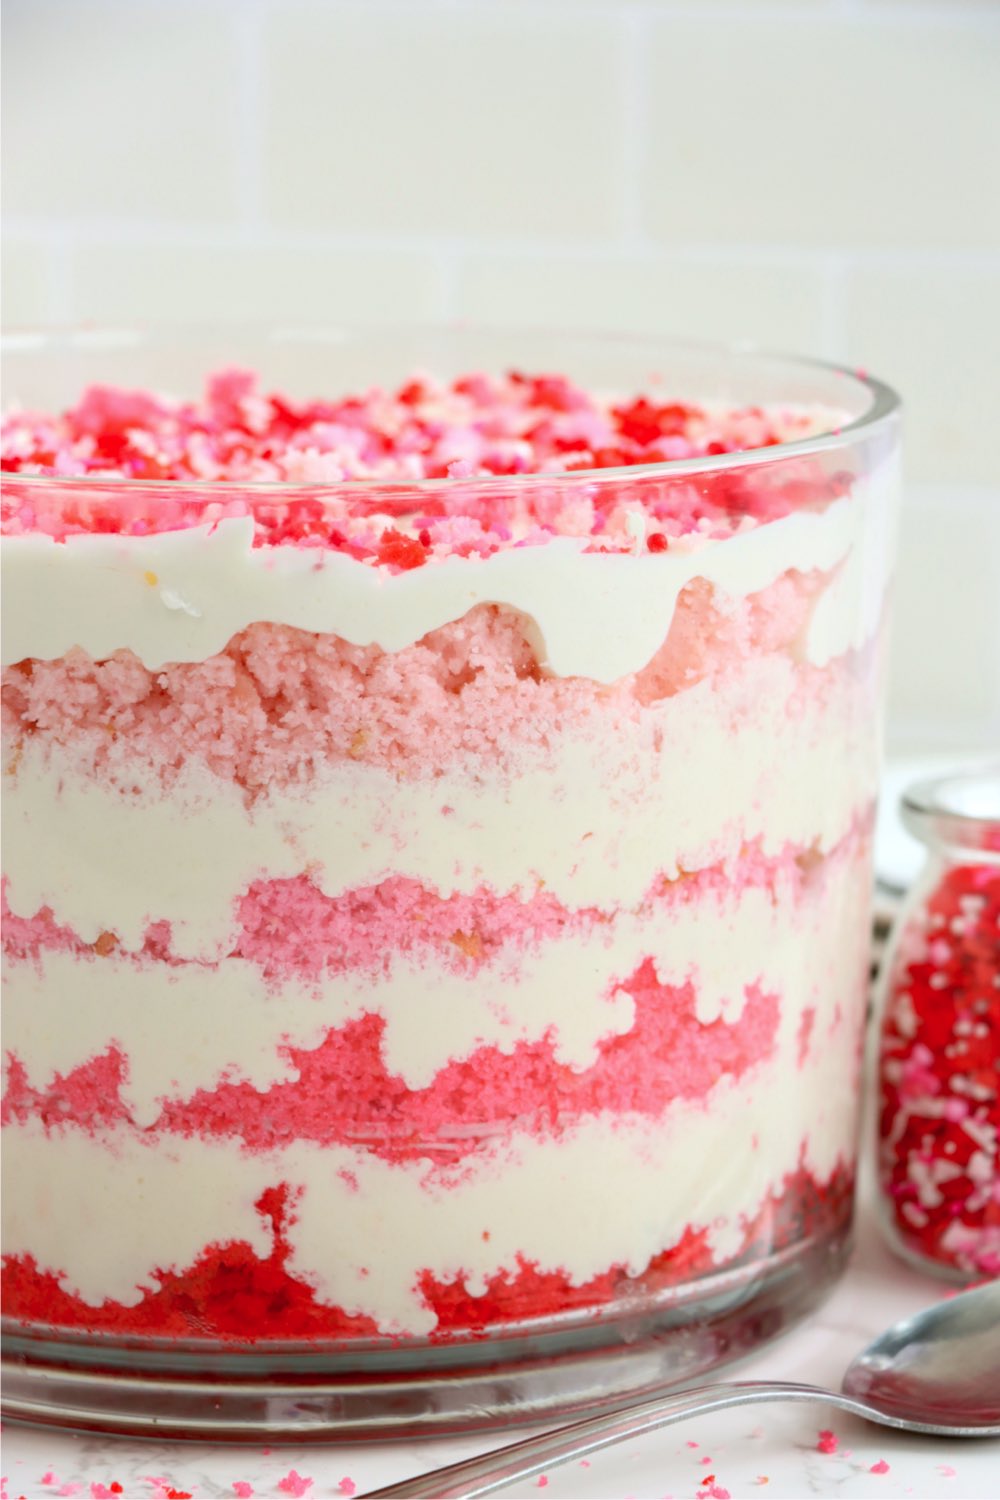 trifle with red and pink layers of cake